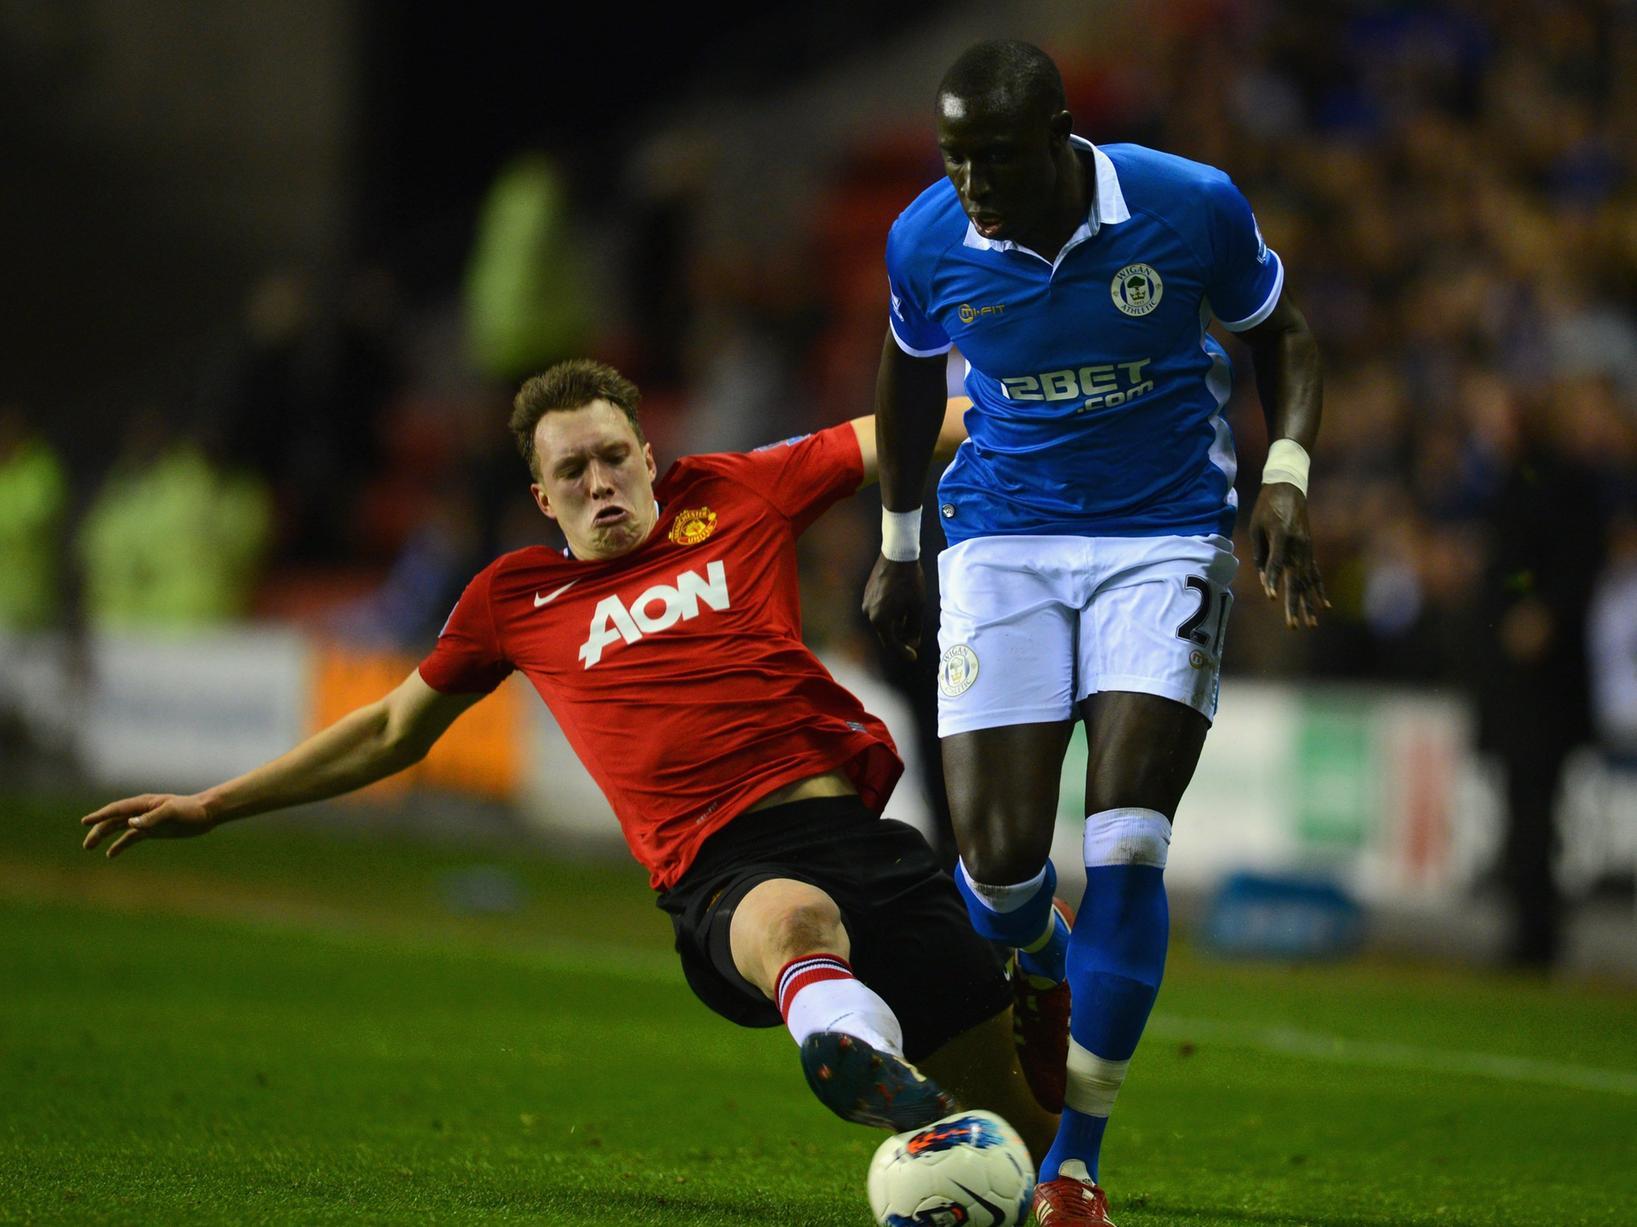 Phil Jones, now of Manchester United, was England regular for many years after leaving Blackburn Rovers.